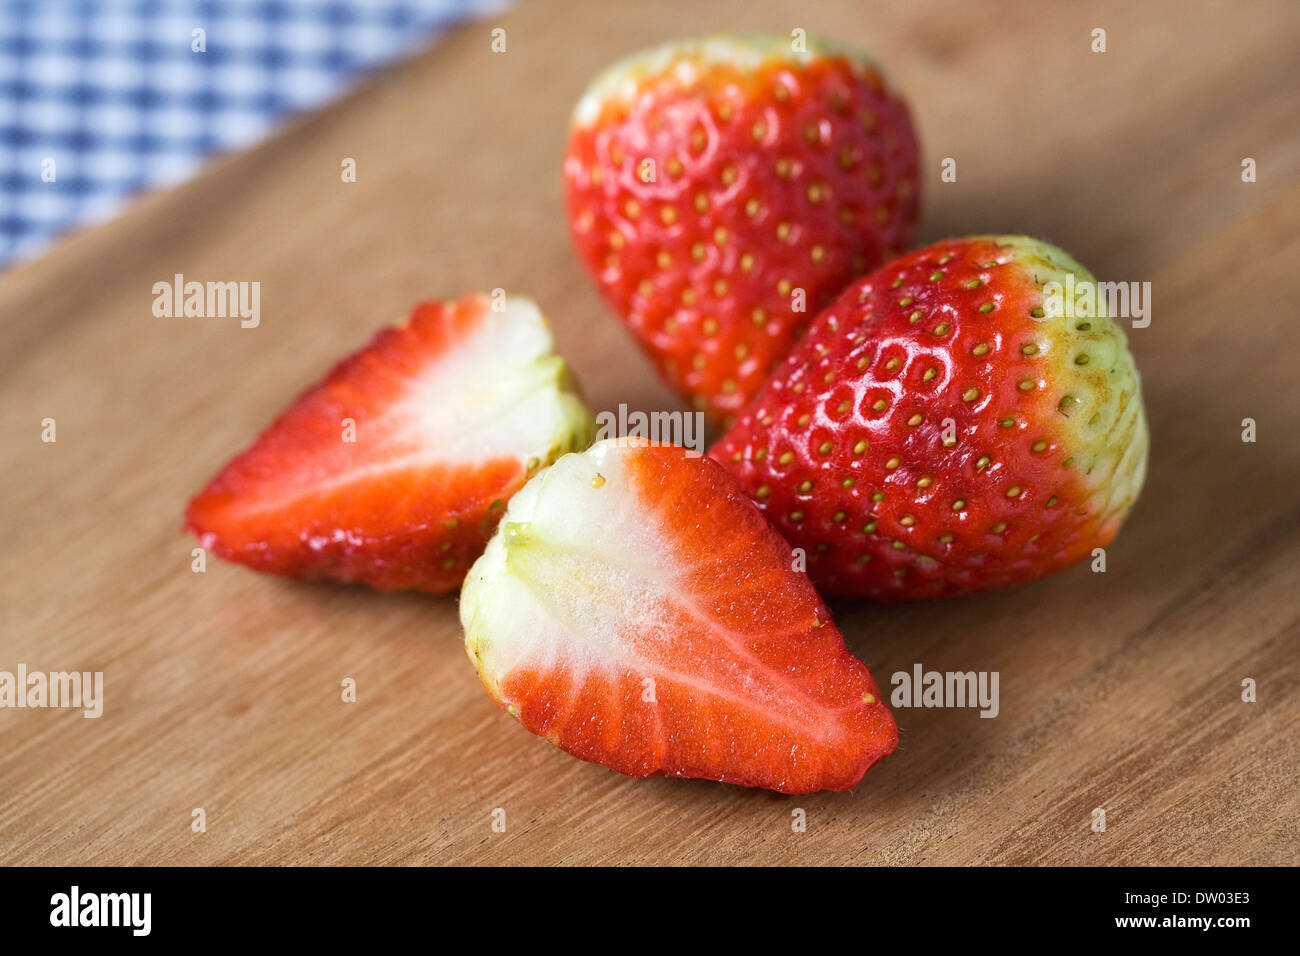 Fragaria. Strawberries on a wooden board. Stock Photo